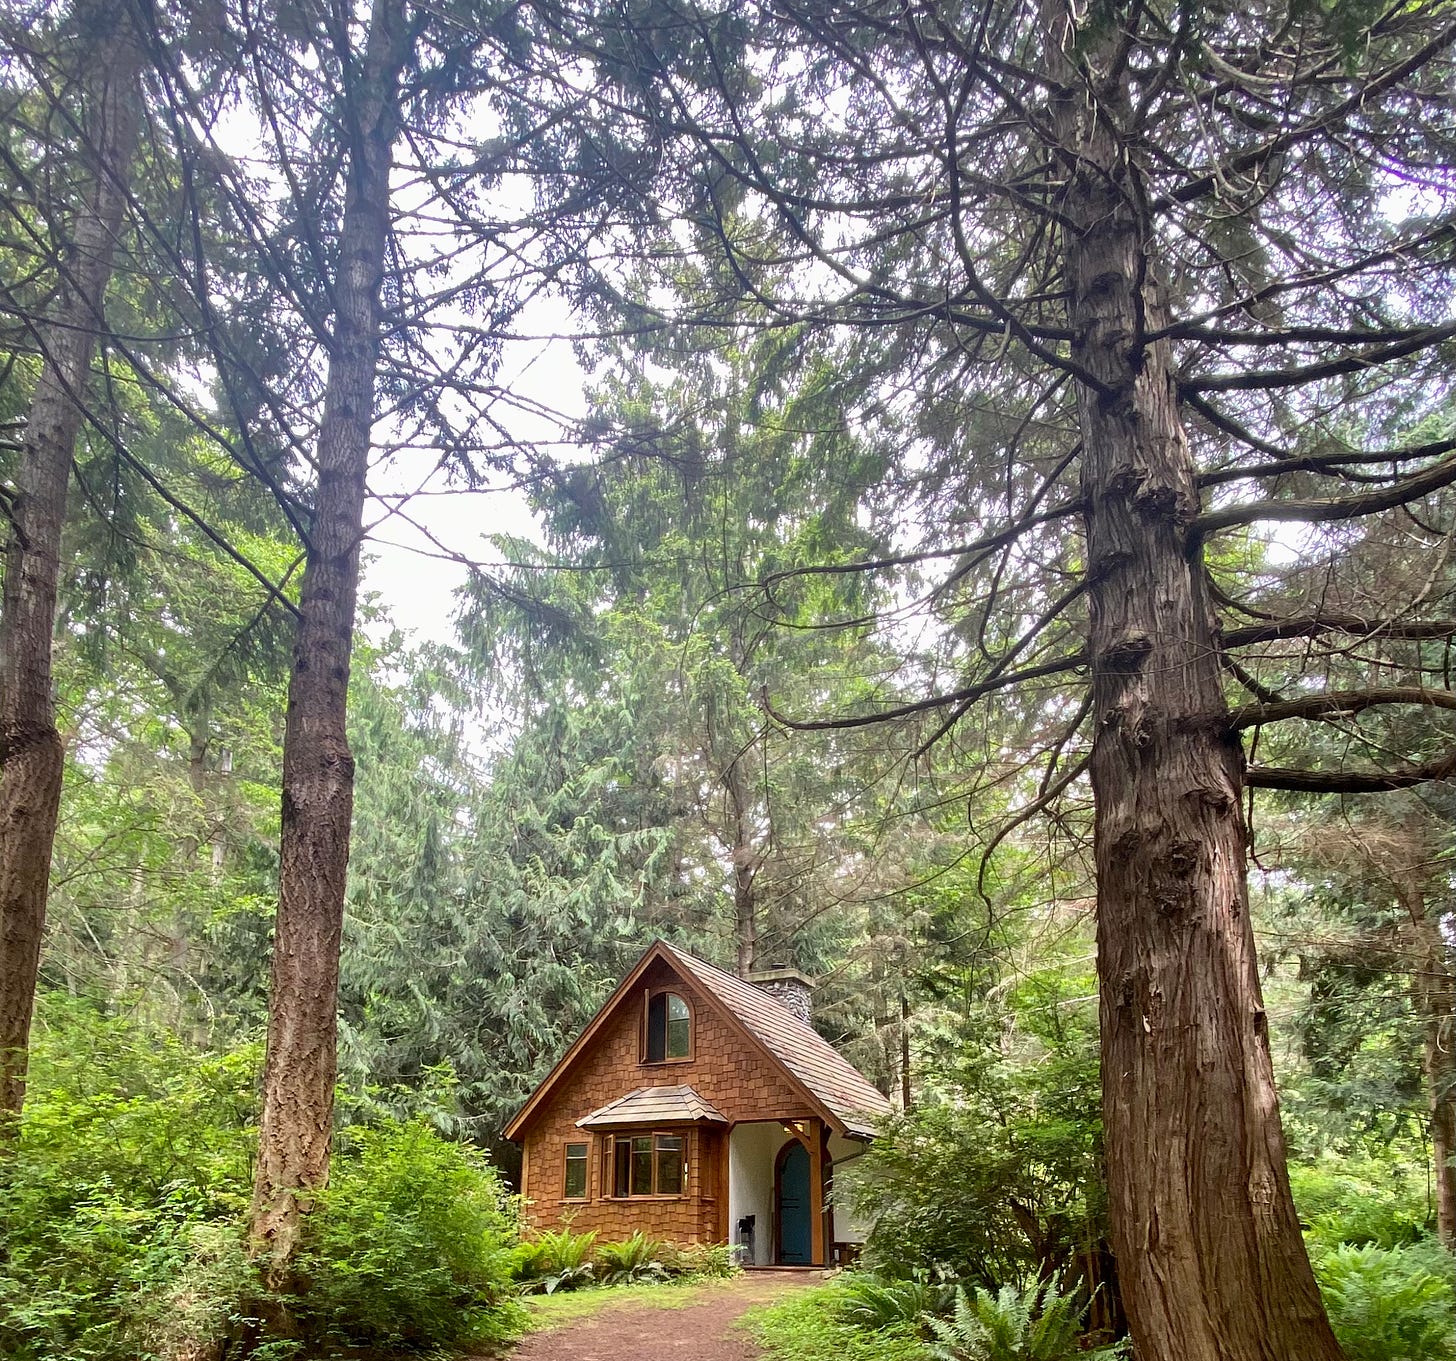 photograph of my cottage at Hedgebrook, a little log cabin with a blue door, set amidst a pine forest.